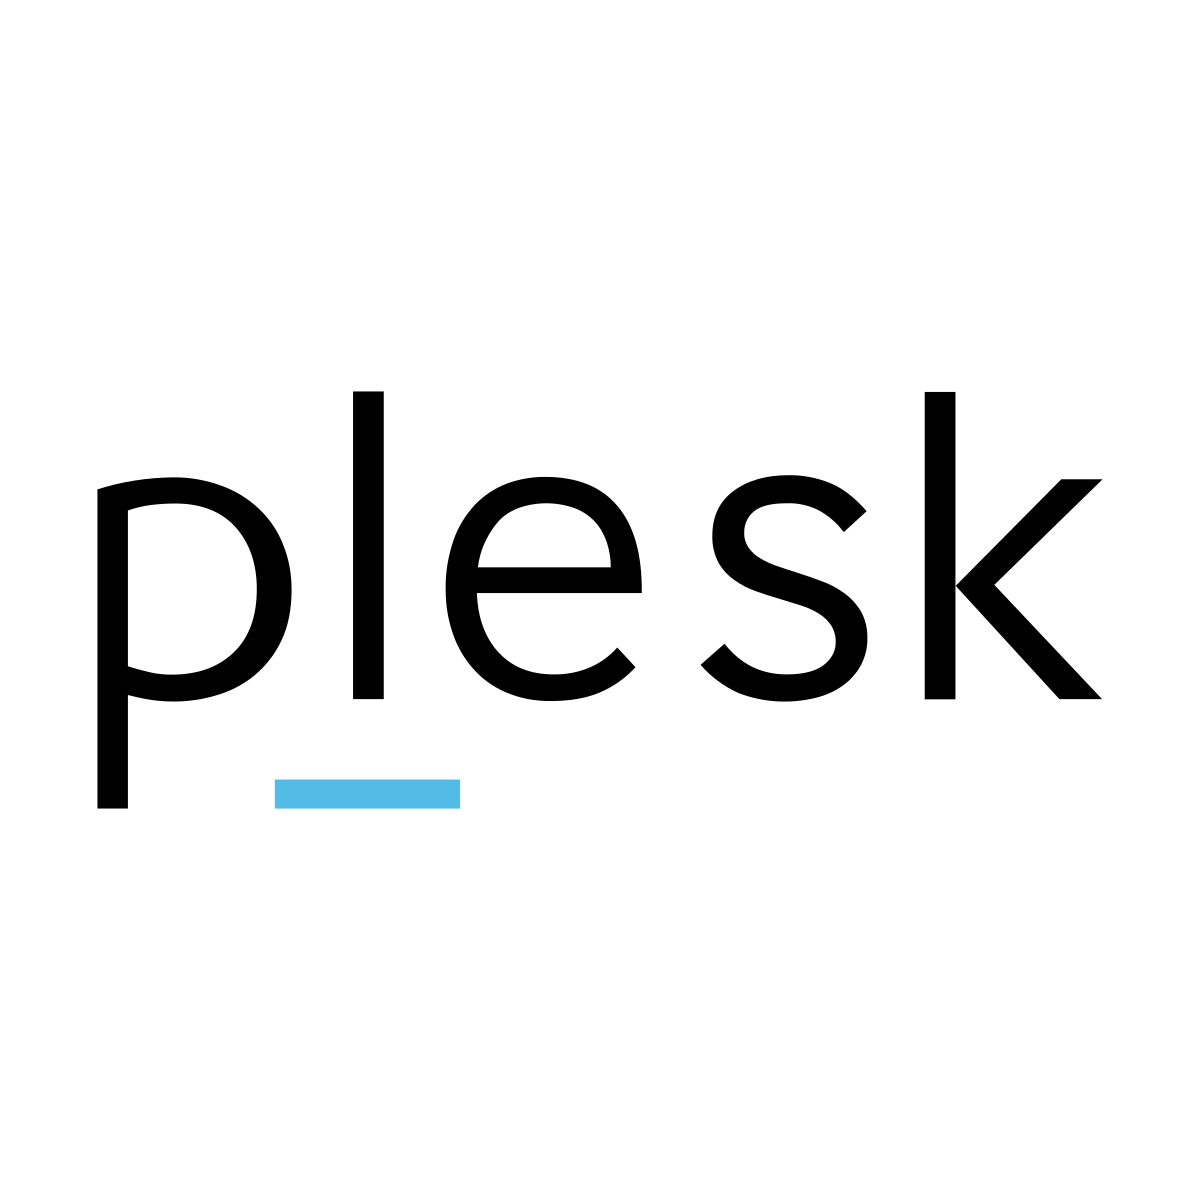 Unable to access Plesk: Unknown database ‘psa’